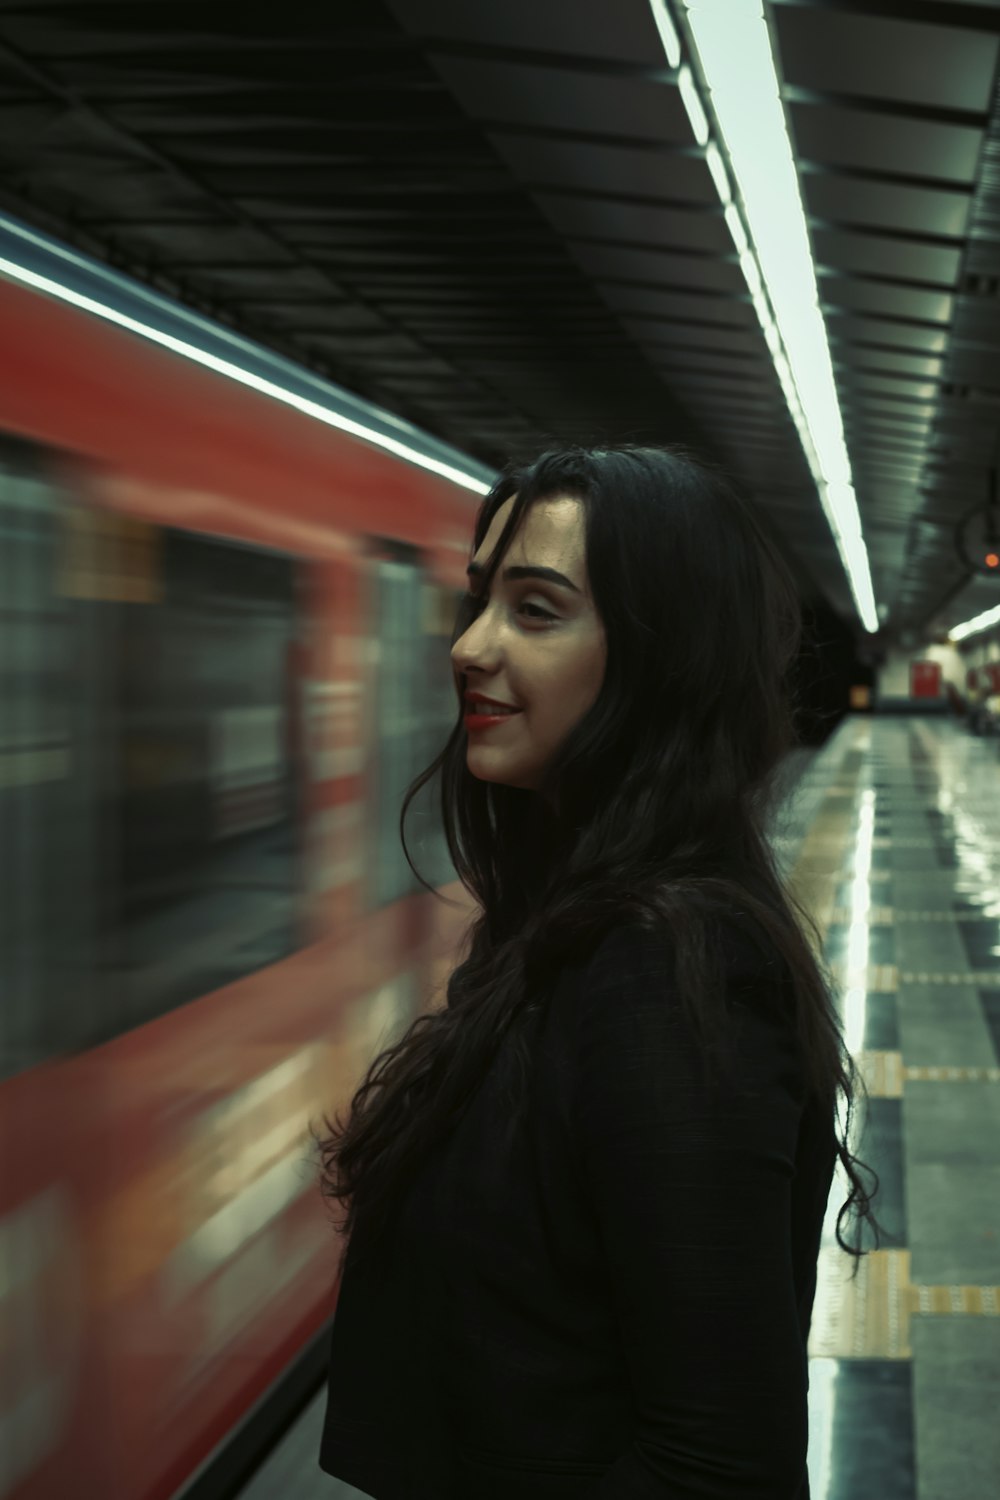 a woman standing in a subway station waiting for a train